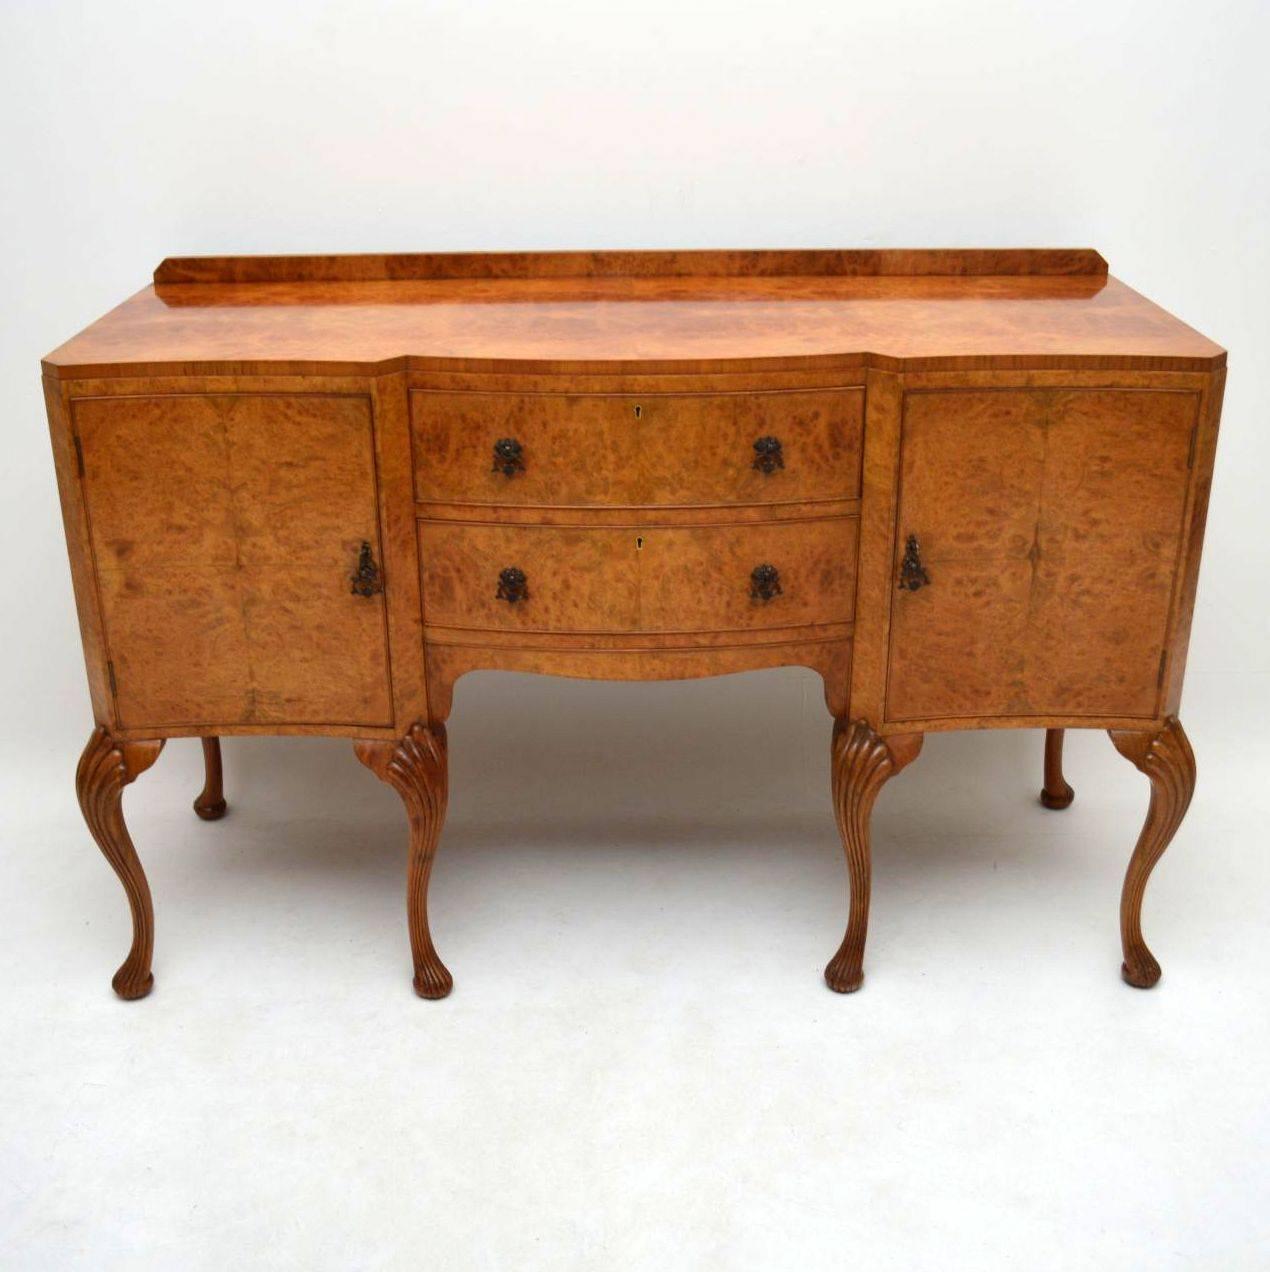 This antique walnut and burr maple sideboard was made by the famous London cabinet makers Epstein, hence the quality. It has a lovely mellow color and is in excellent original condition. The patterns on the veneers are beautiful. There are two